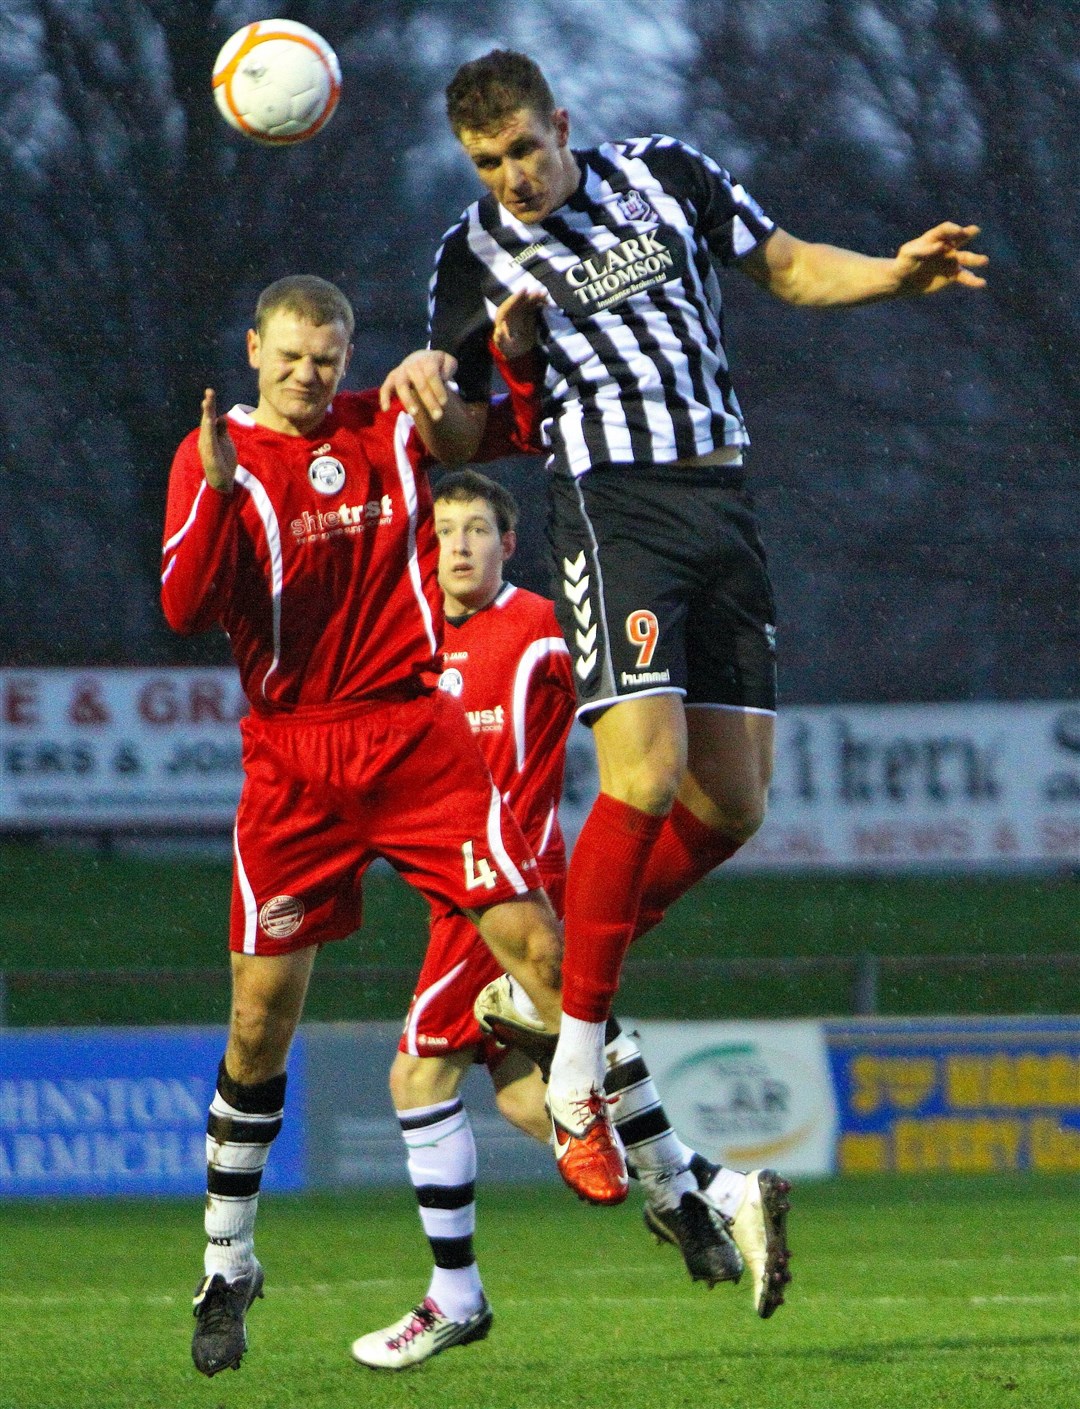 Paul Millar scored Elgin's only goal in their play-off defeat in 2012.